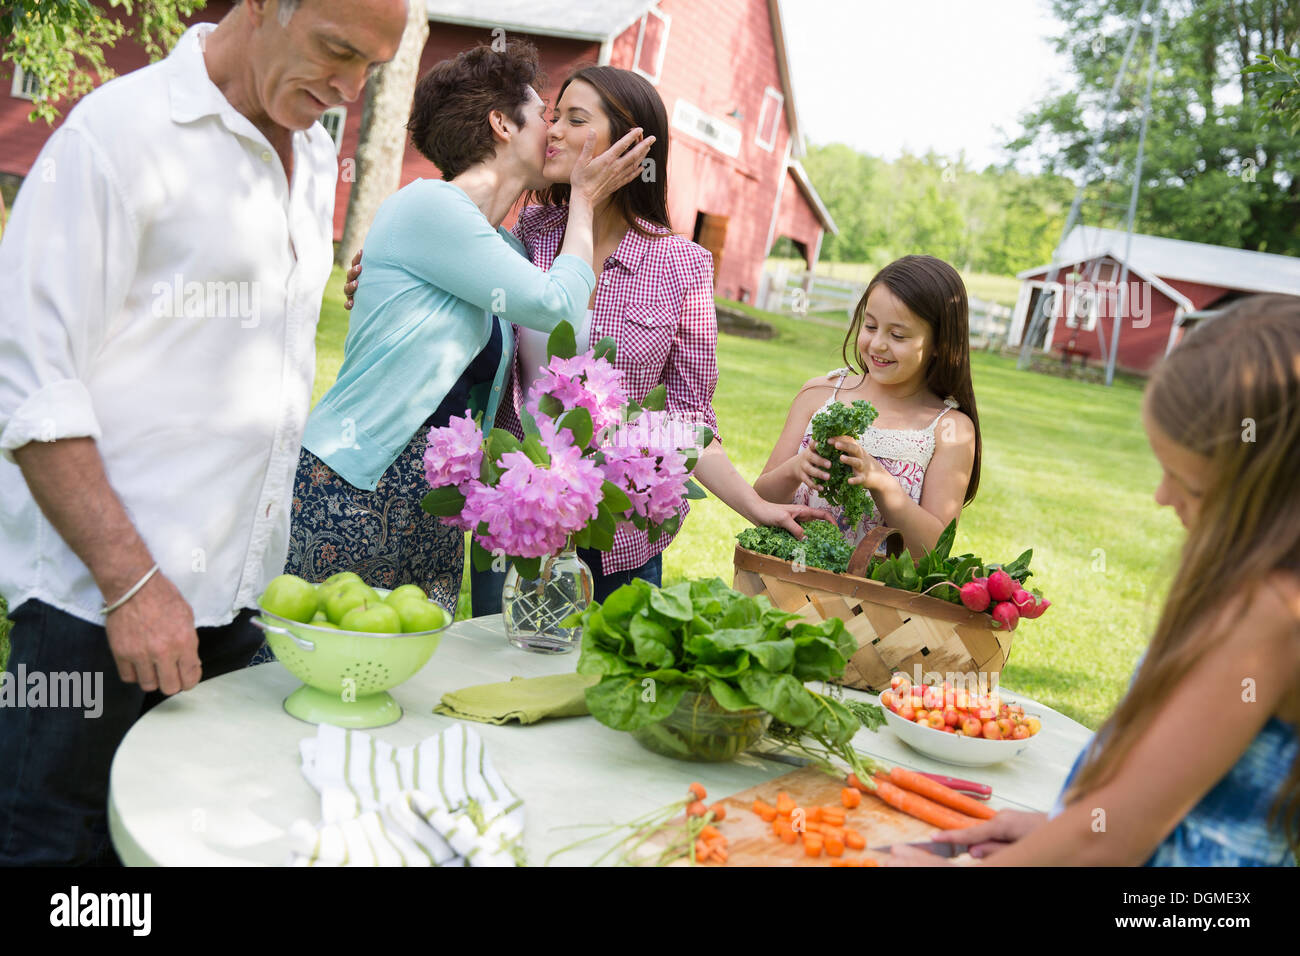 Family party. A table laid with salads and fresh fruits and vegetables. A mother kissing a daughter on the cheek. Stock Photo